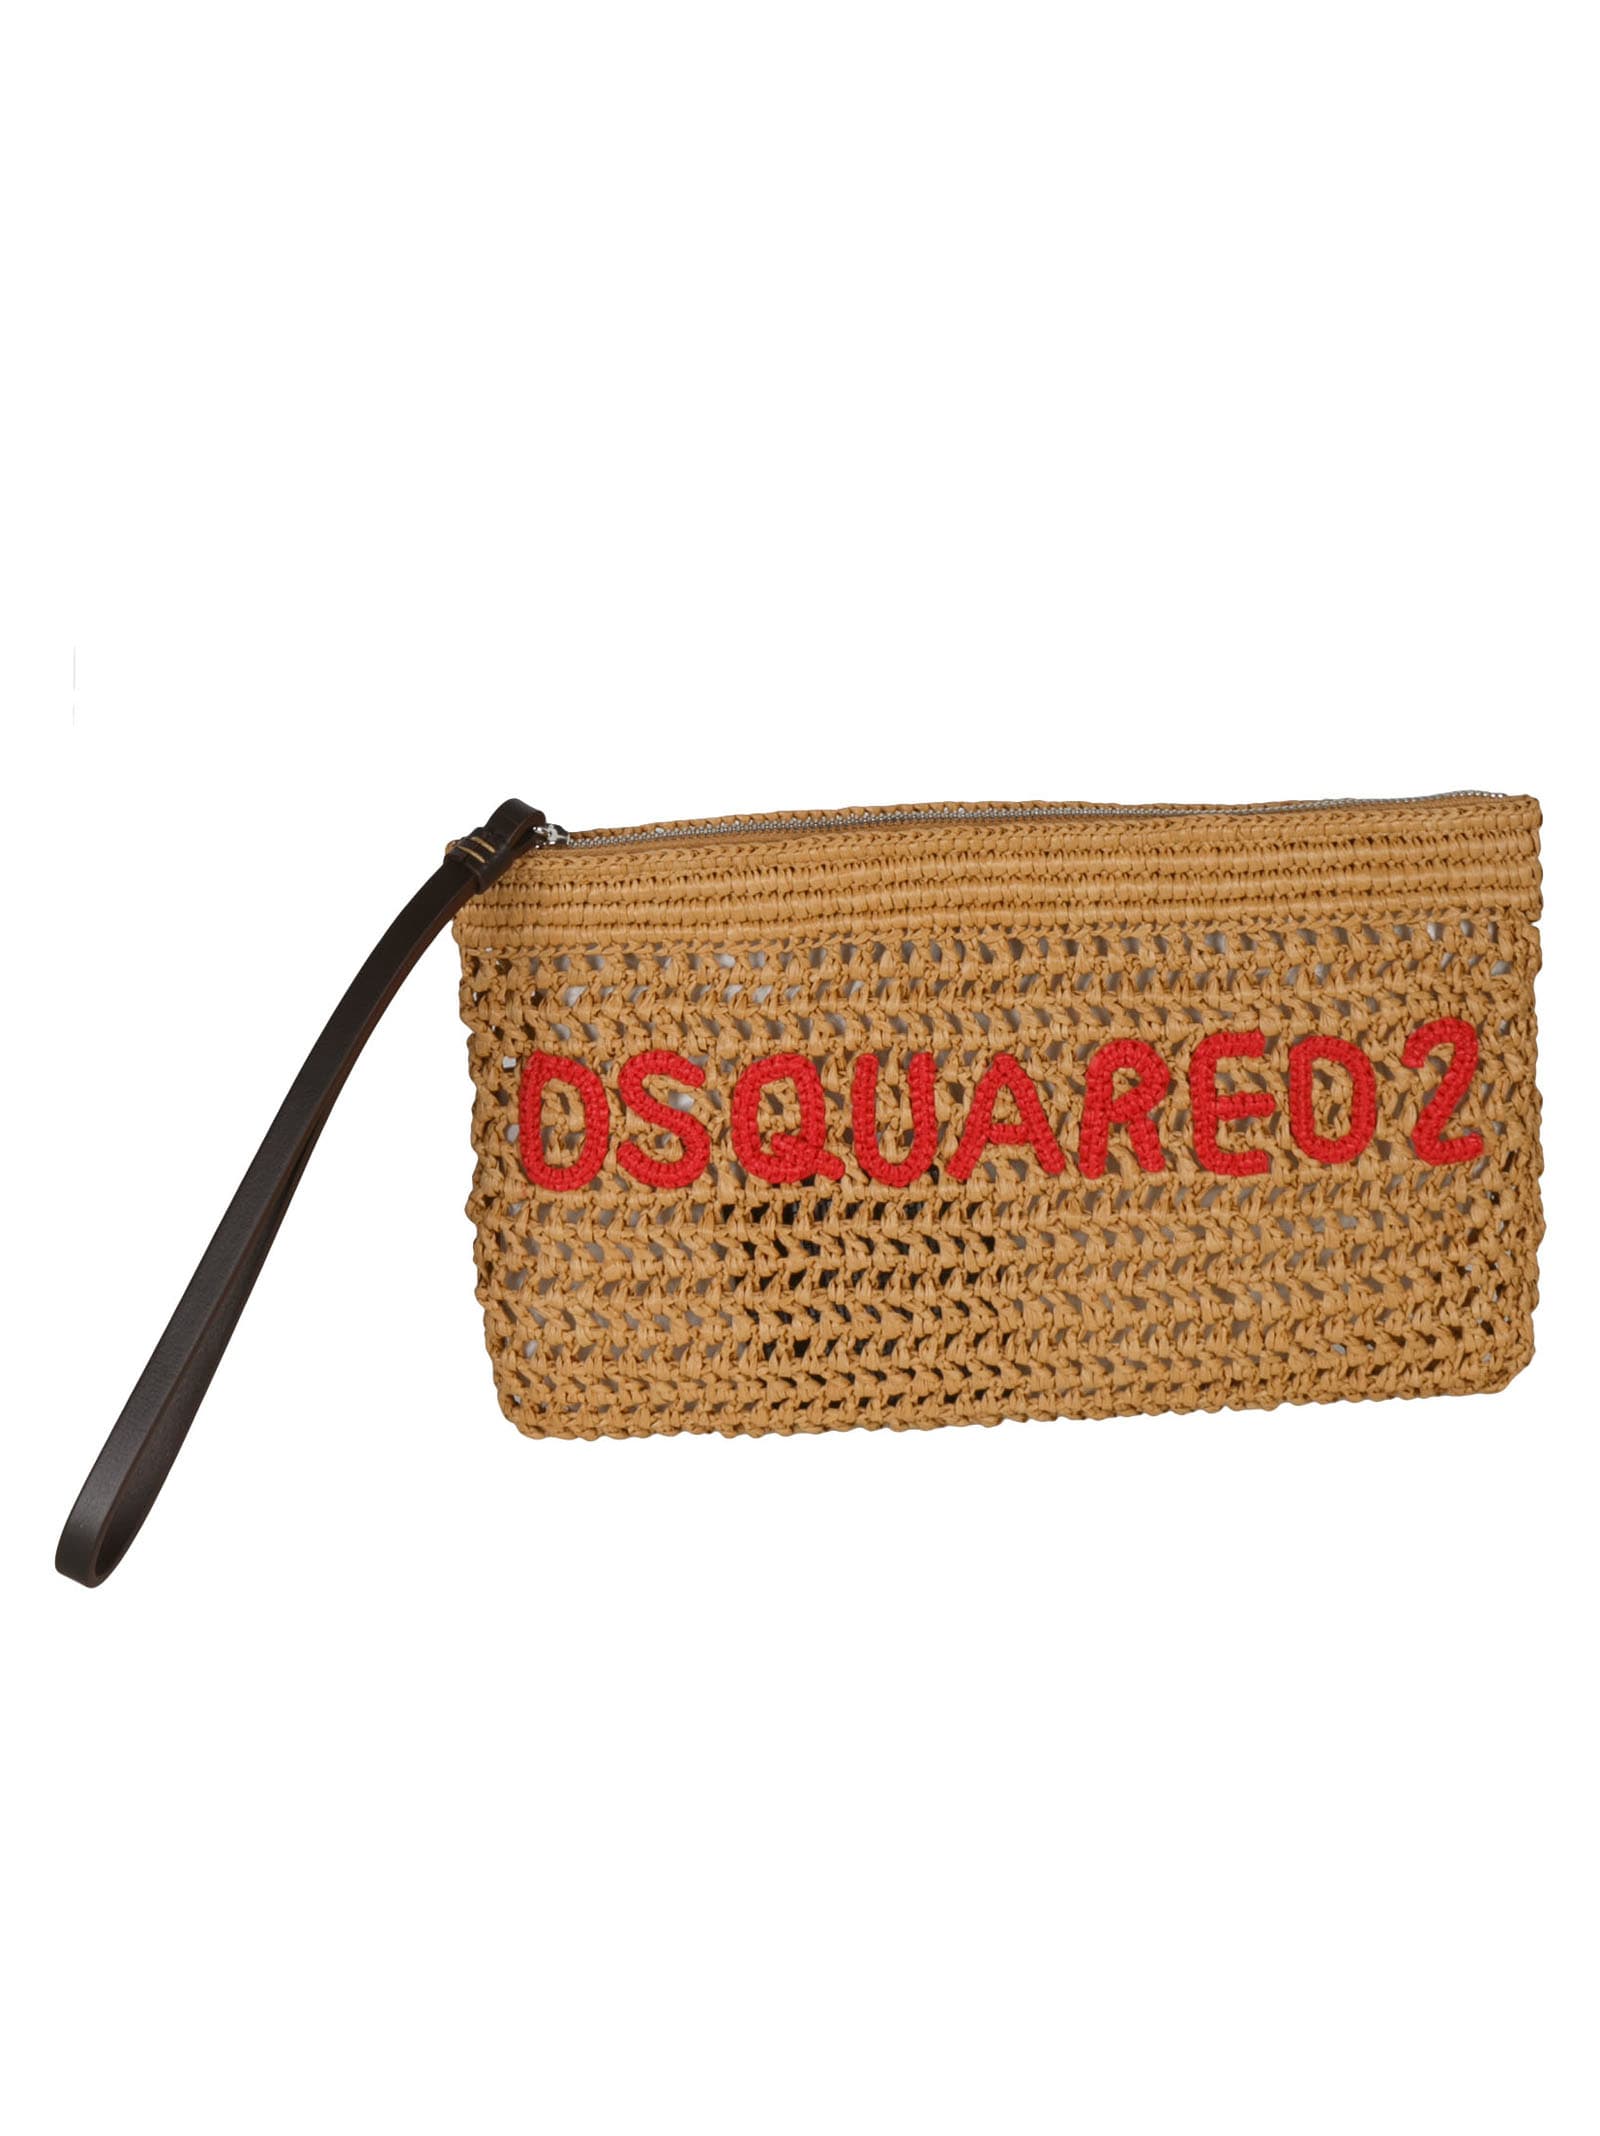 Dsquared2 Logo Embroidered Perforated Clutch